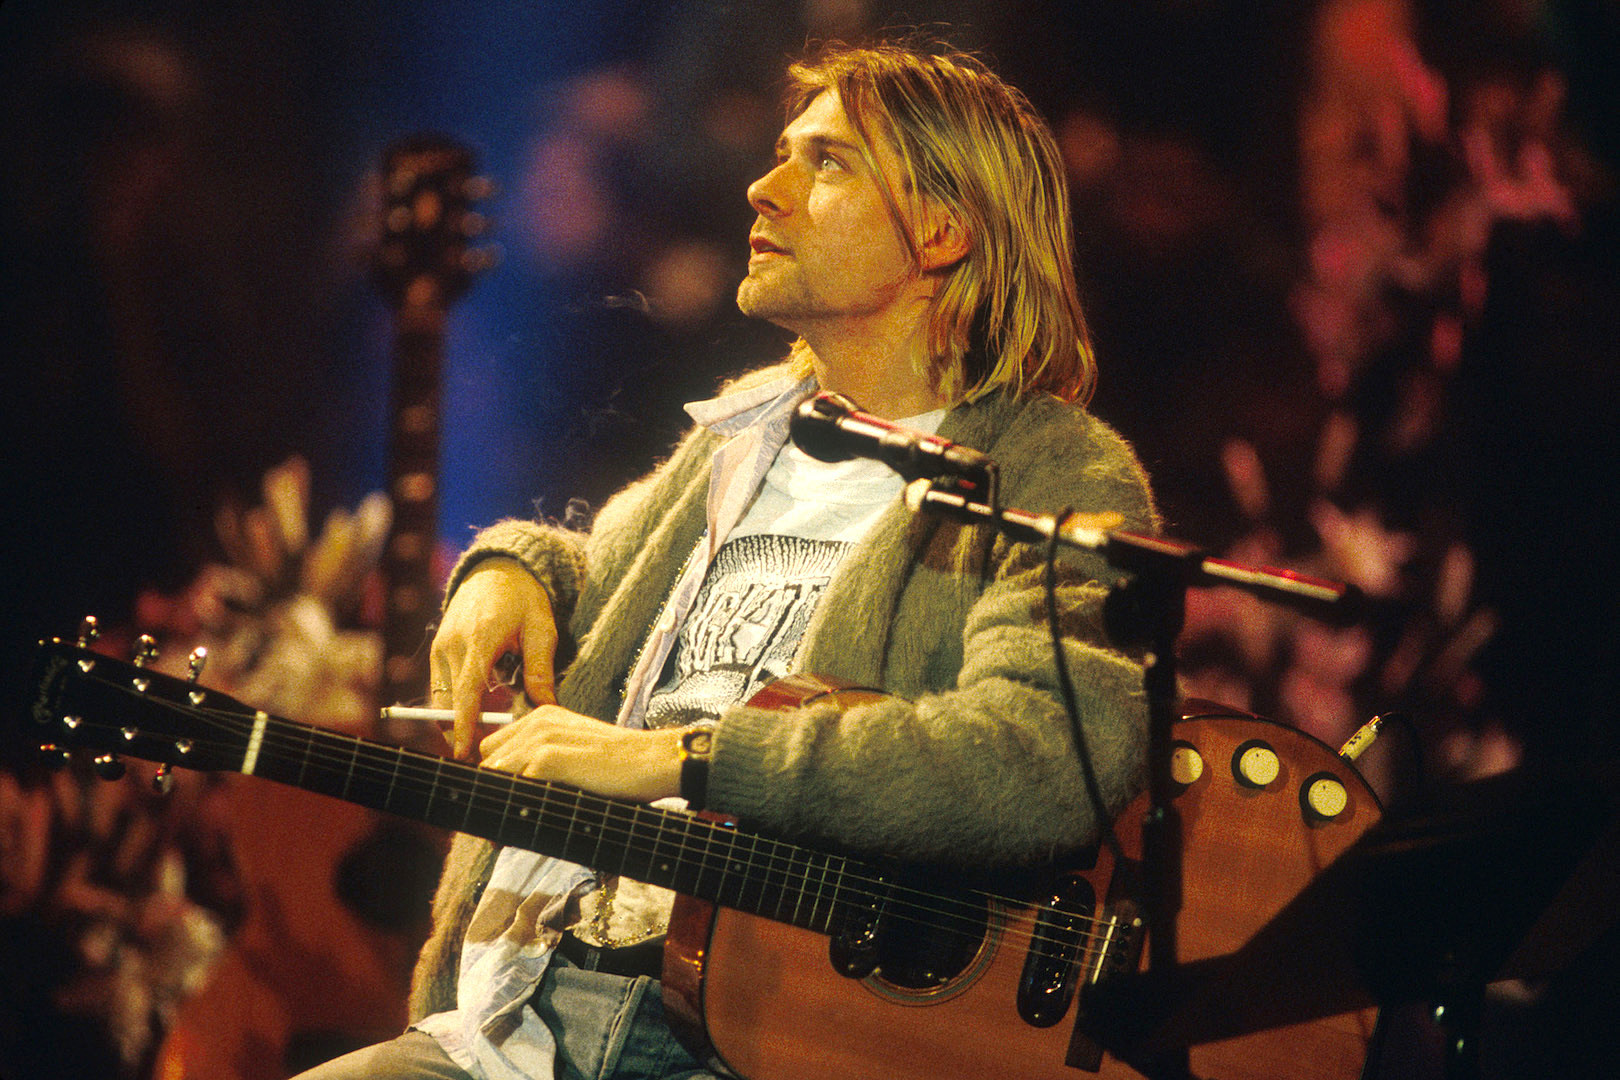 Kurt Cobain's 'Unplugged' Sweater Sells for $334,000 at Auction